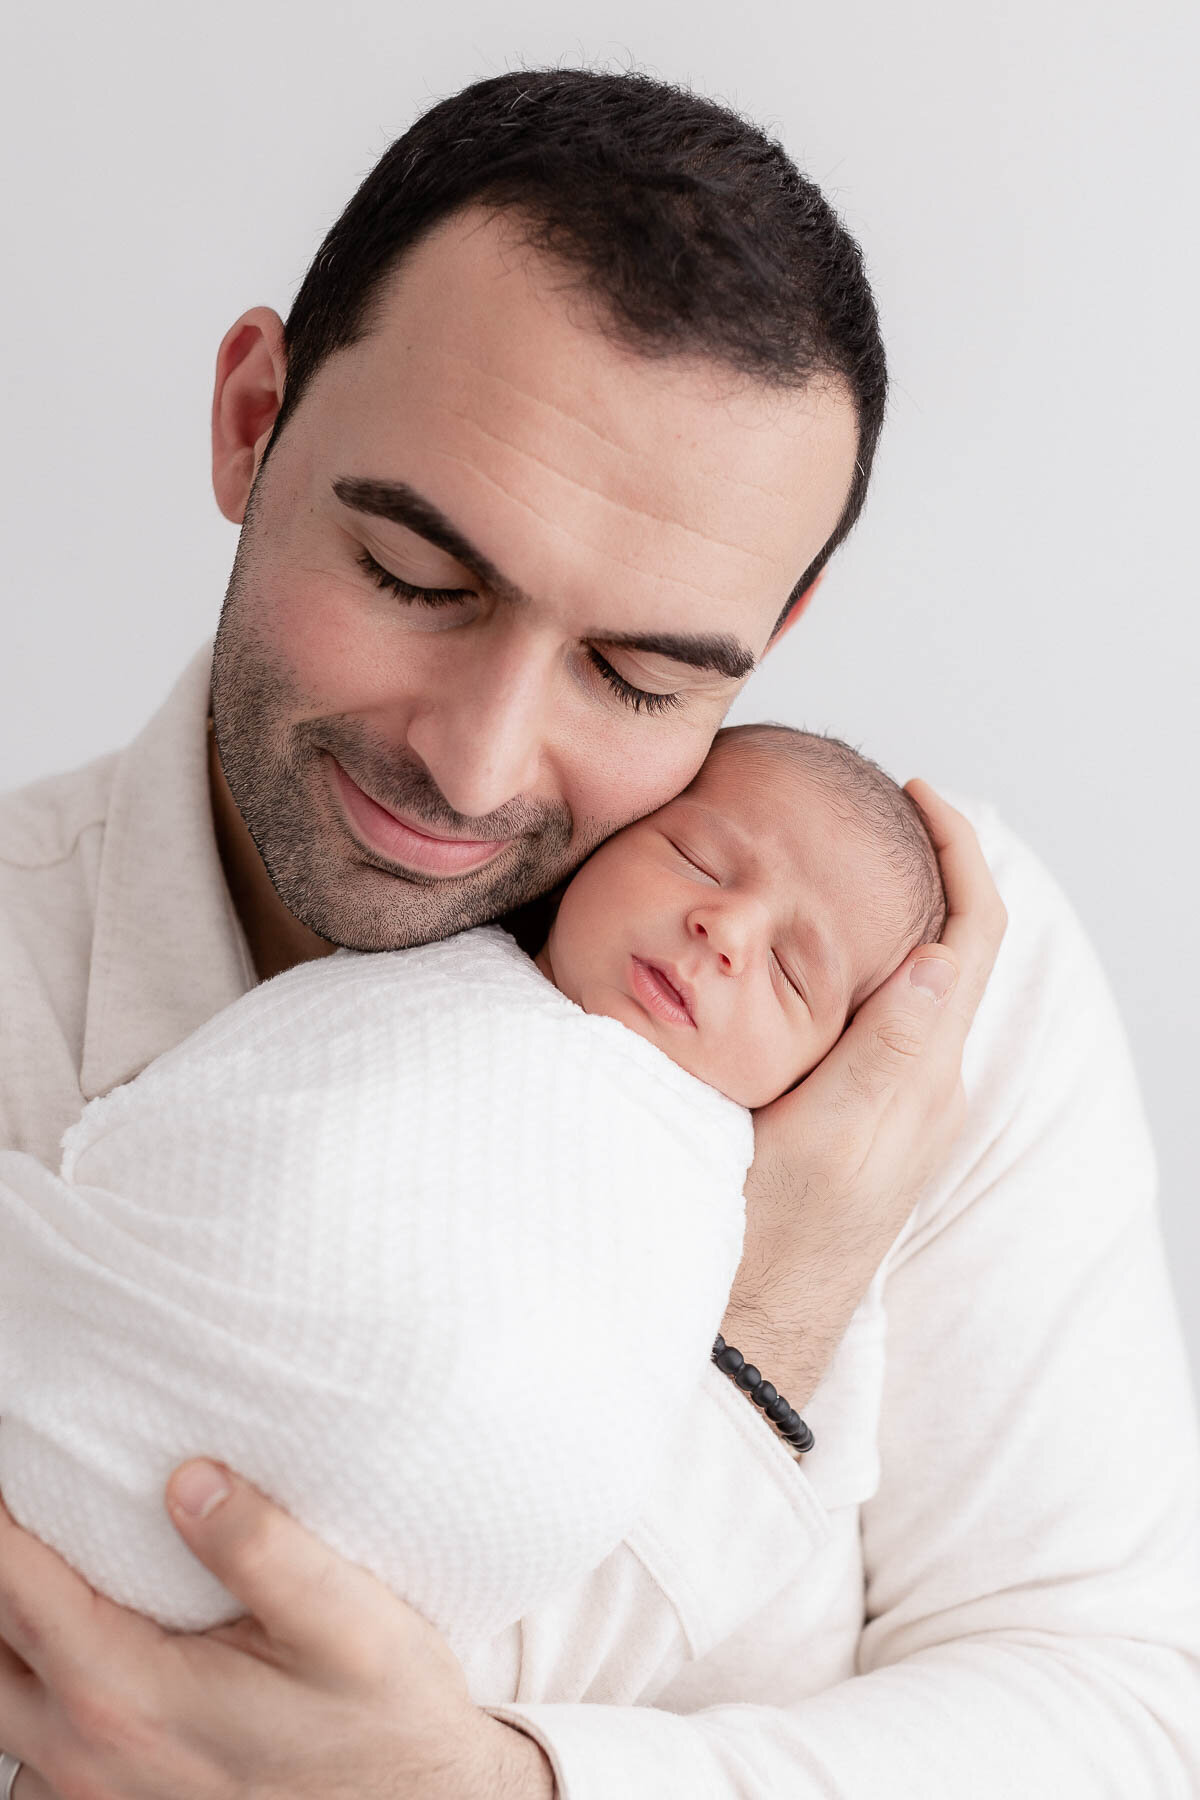 Dad holding newborn baby cheek to cheek. Dad has eyes closed and baby is sleeping. Dad is wearing a cream colored shirt and baby is wrapped in a white textured wrap.